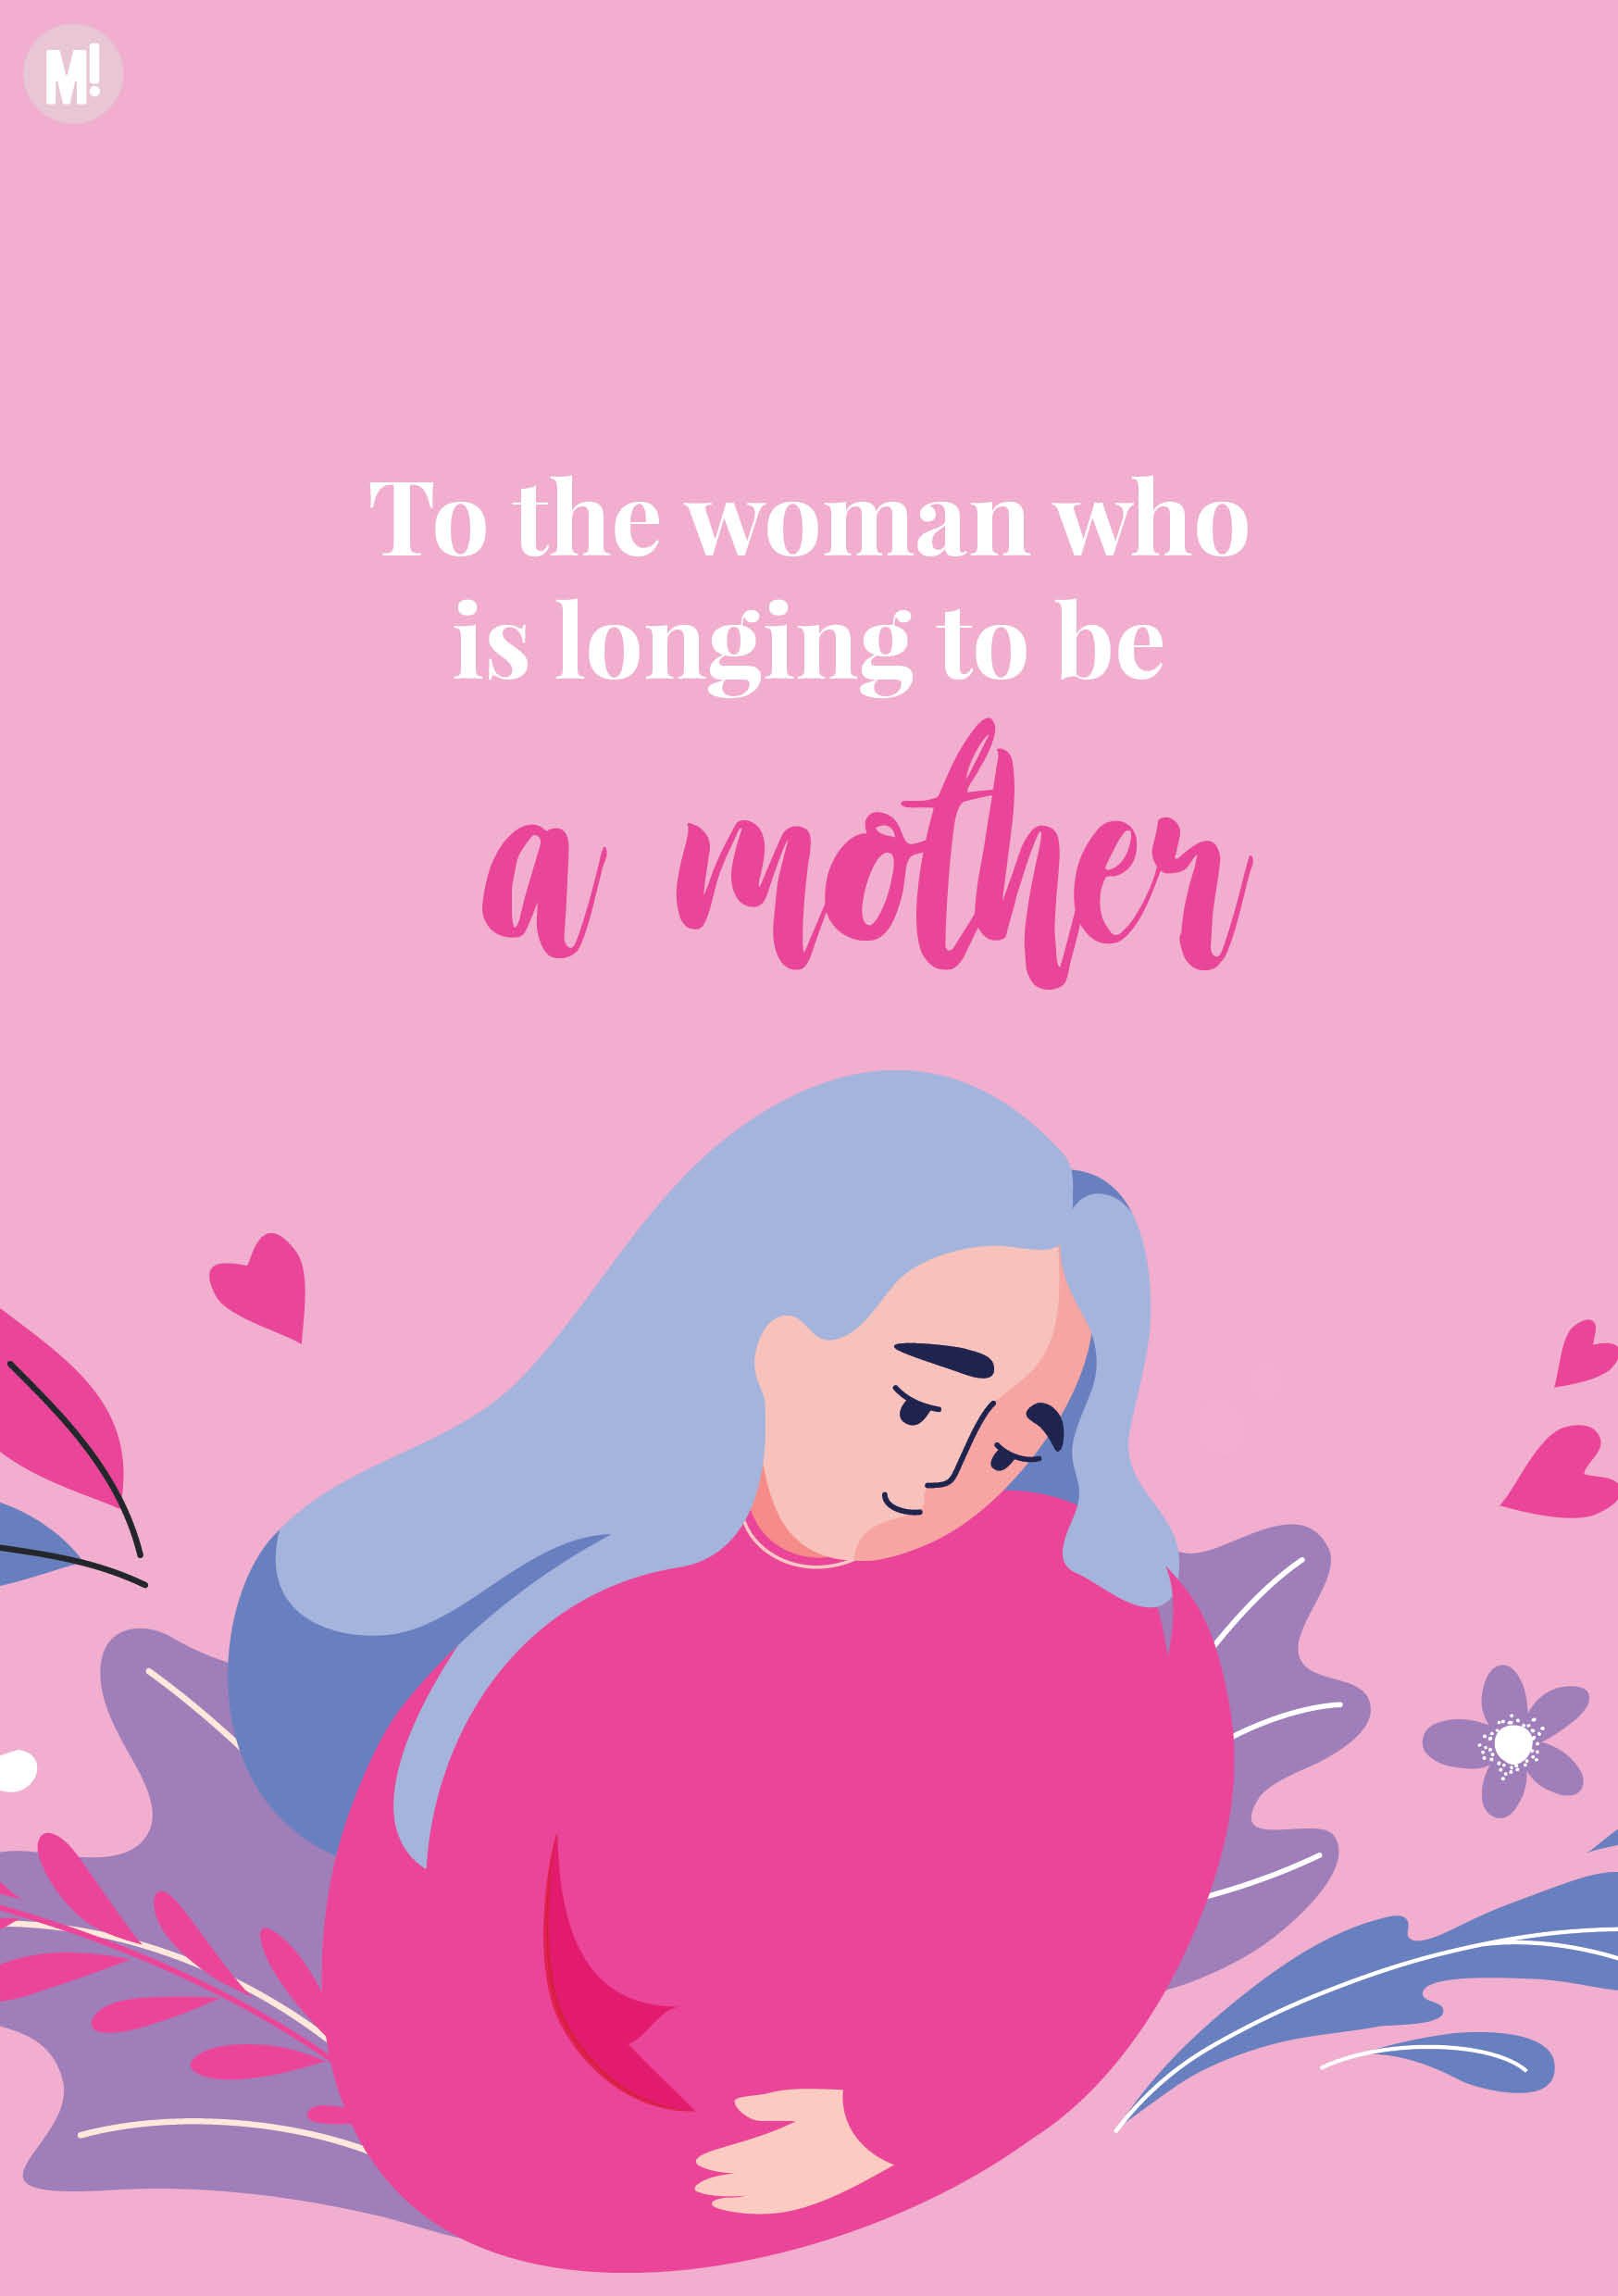 Happy Mothers Day: To the woman who is longing to be a mother.